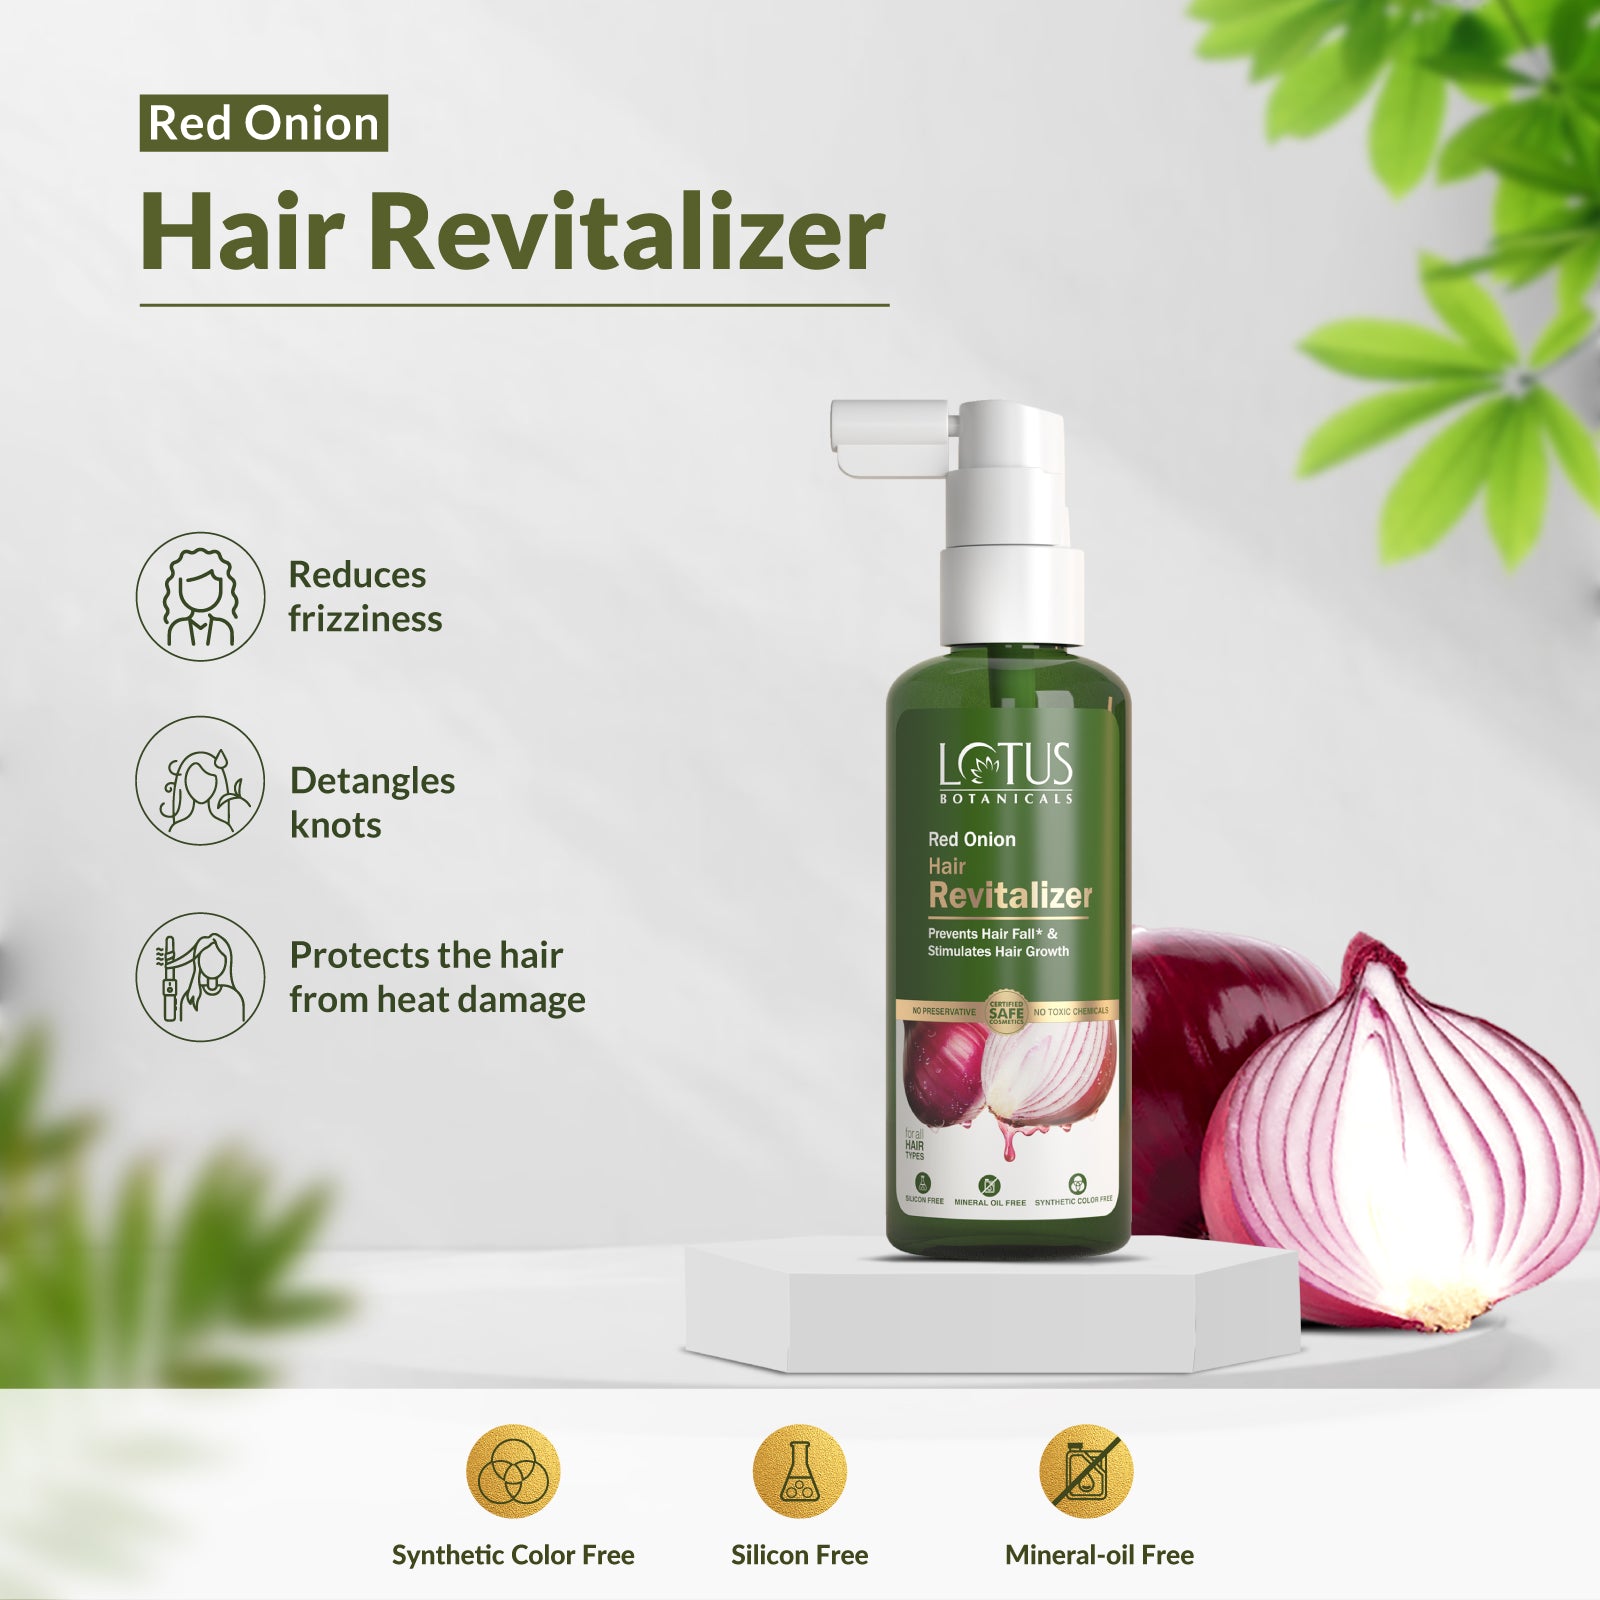 Red Onion Hair Re-growth & Anti HairFall Combo - Natural Solution for Hair Regeneration and Prevention of Hair Loss